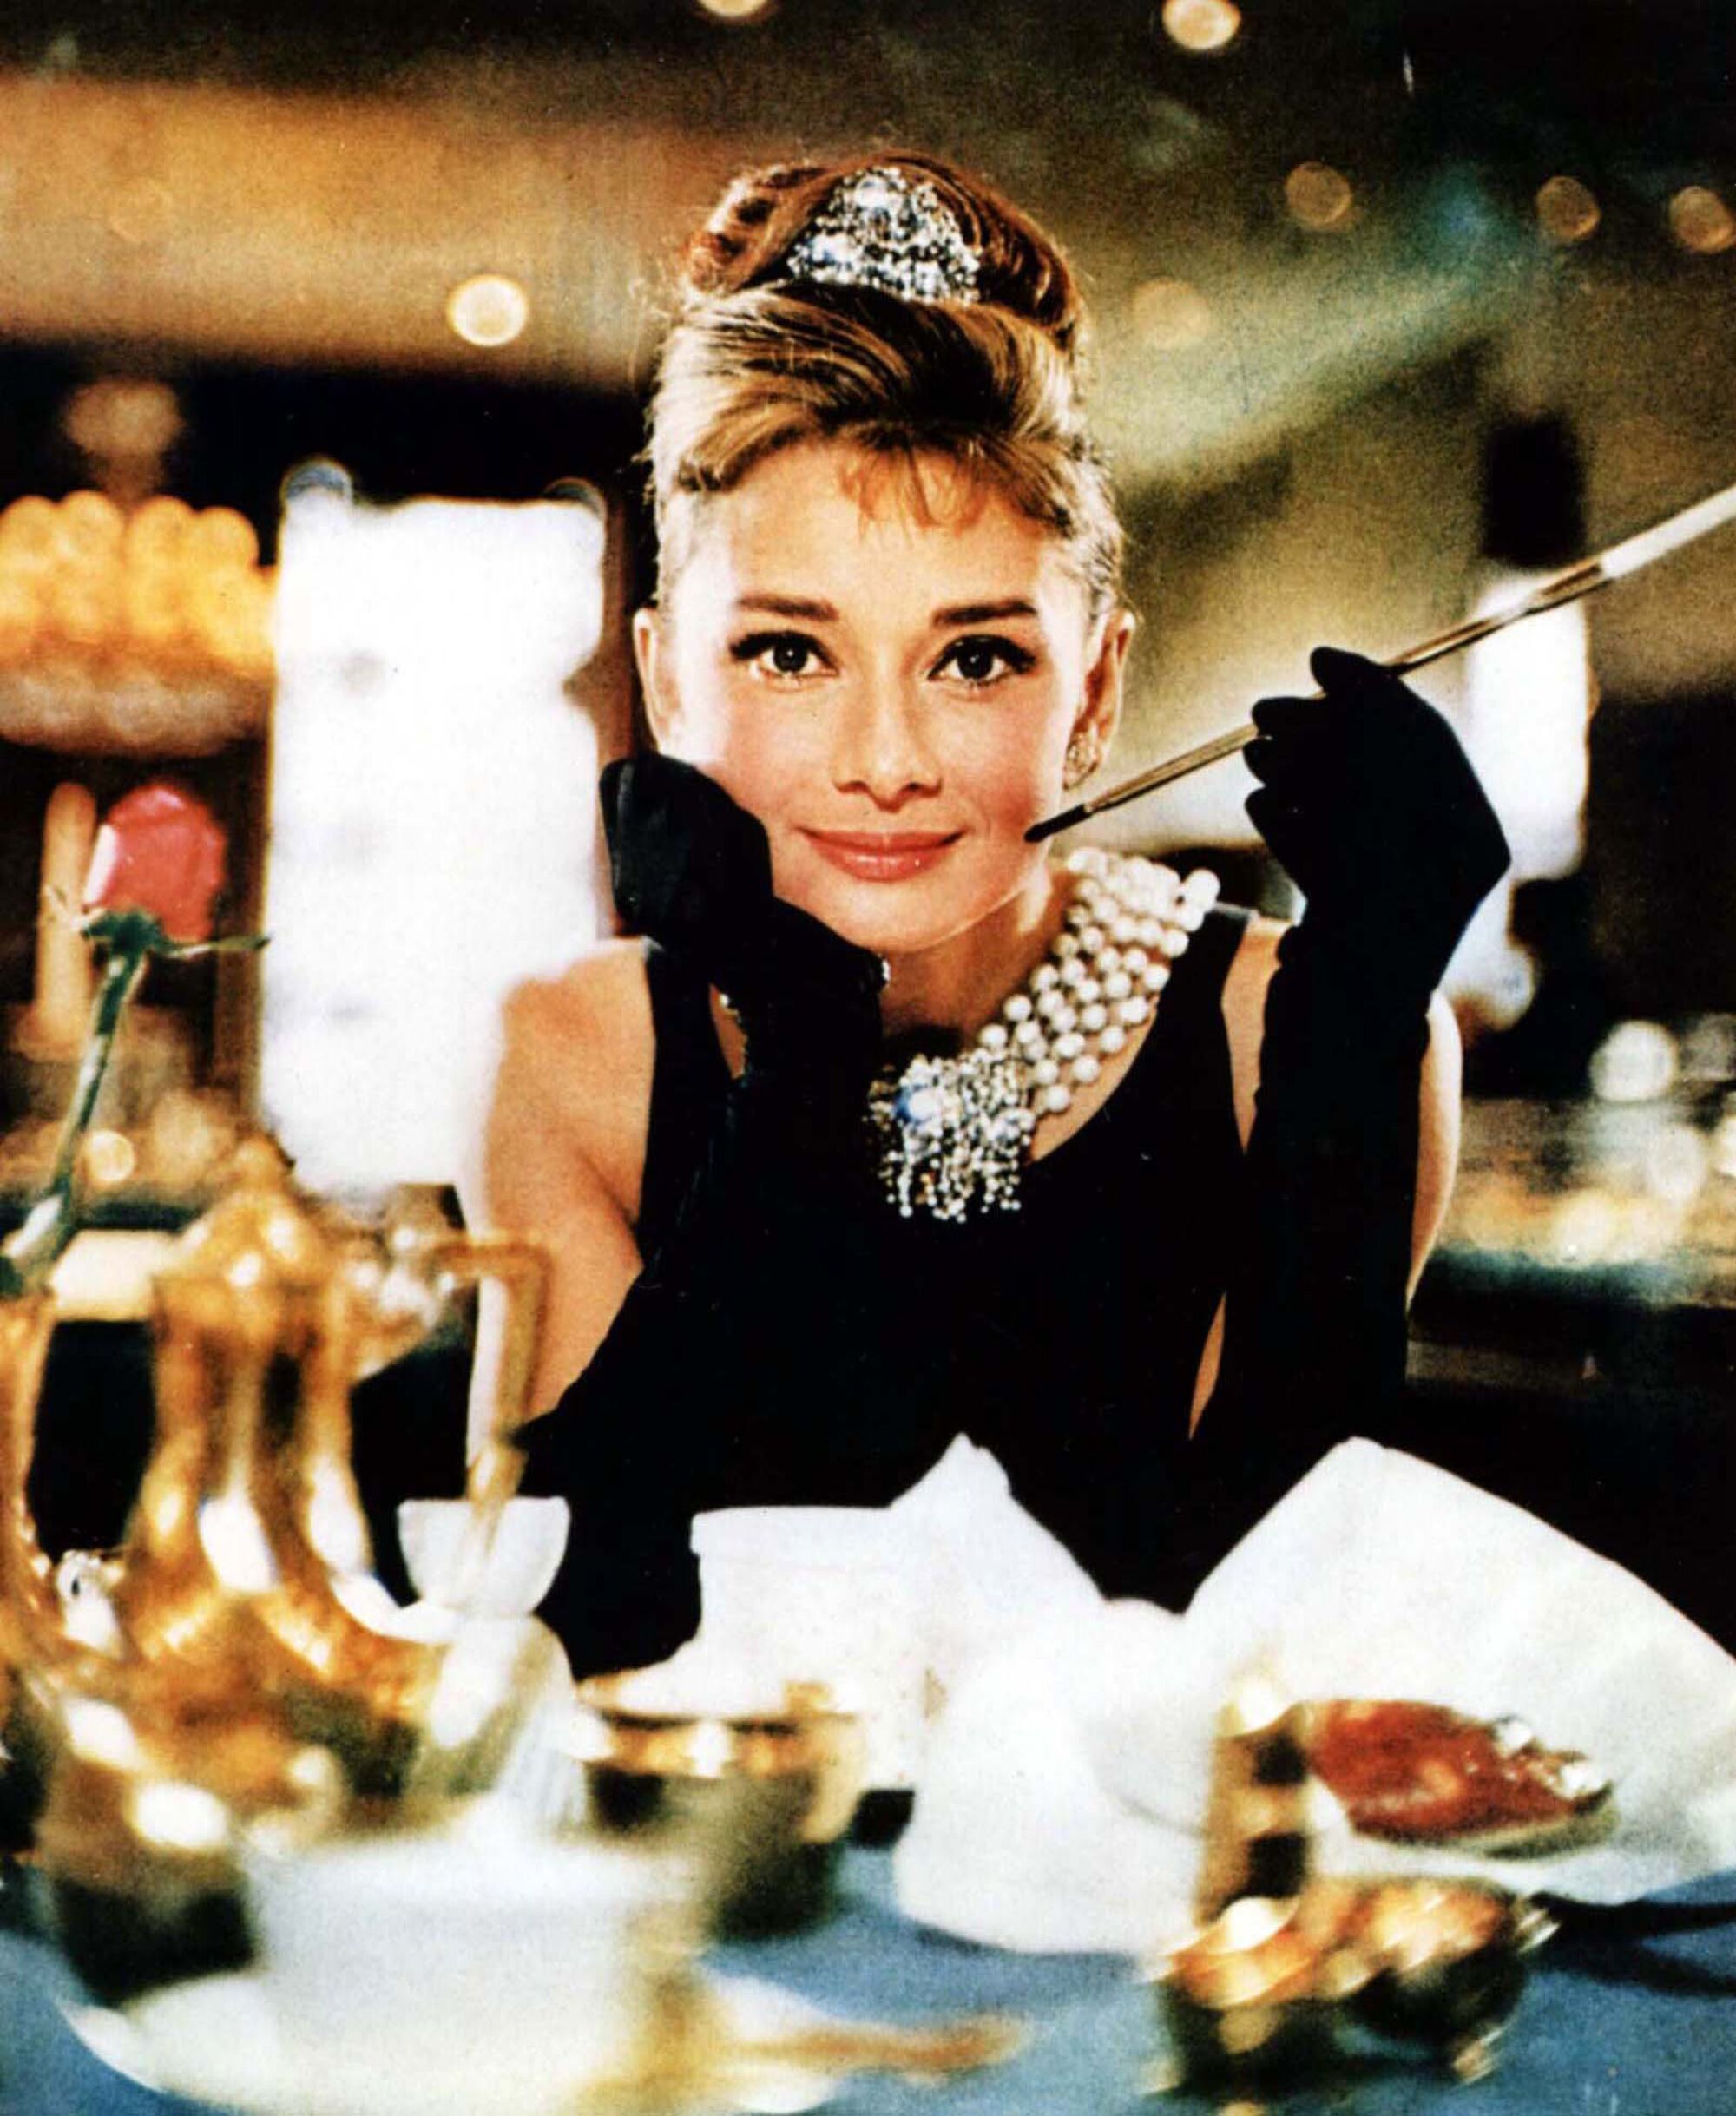 This undated photo shows actress Audrey Hepburn in the 1961 film, "Breakfast at Tiffany's." 